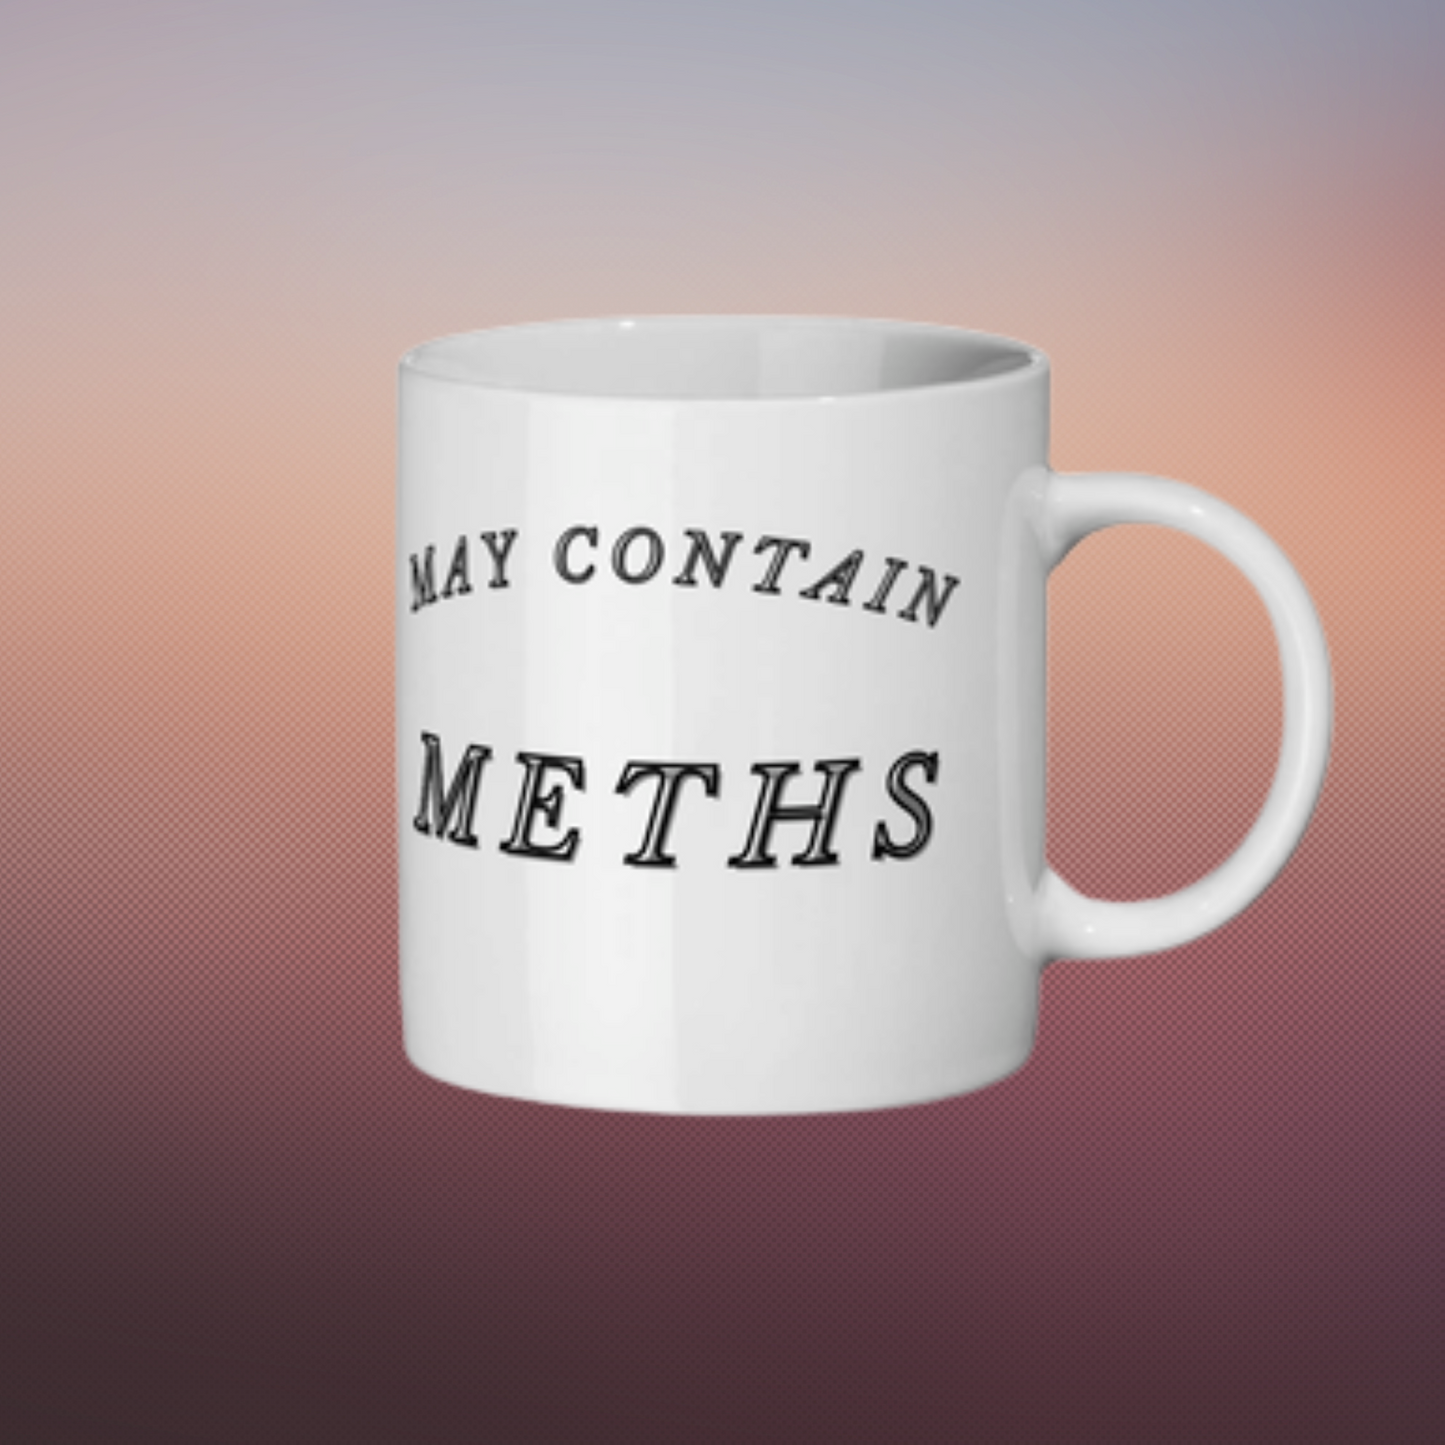 Humorous Premium Quality 11oz Ceramic Coffee Mug With May Contain Meths Written On The Sides | Funny Mug For Office | Amusing Cup For Tea